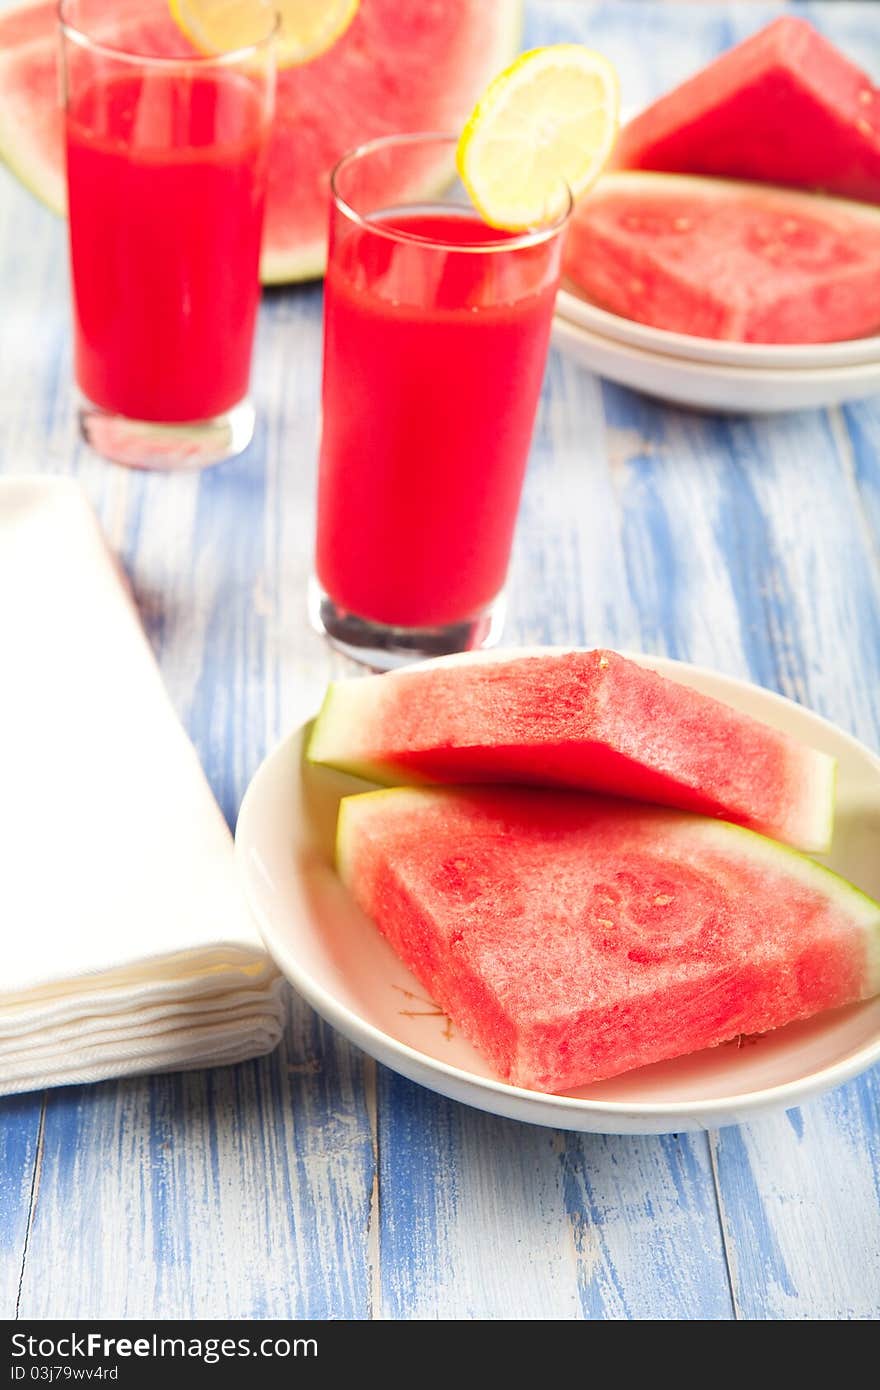 Just in time for summer a watermelon overload! watermelon wedges with cold watermelon punch.